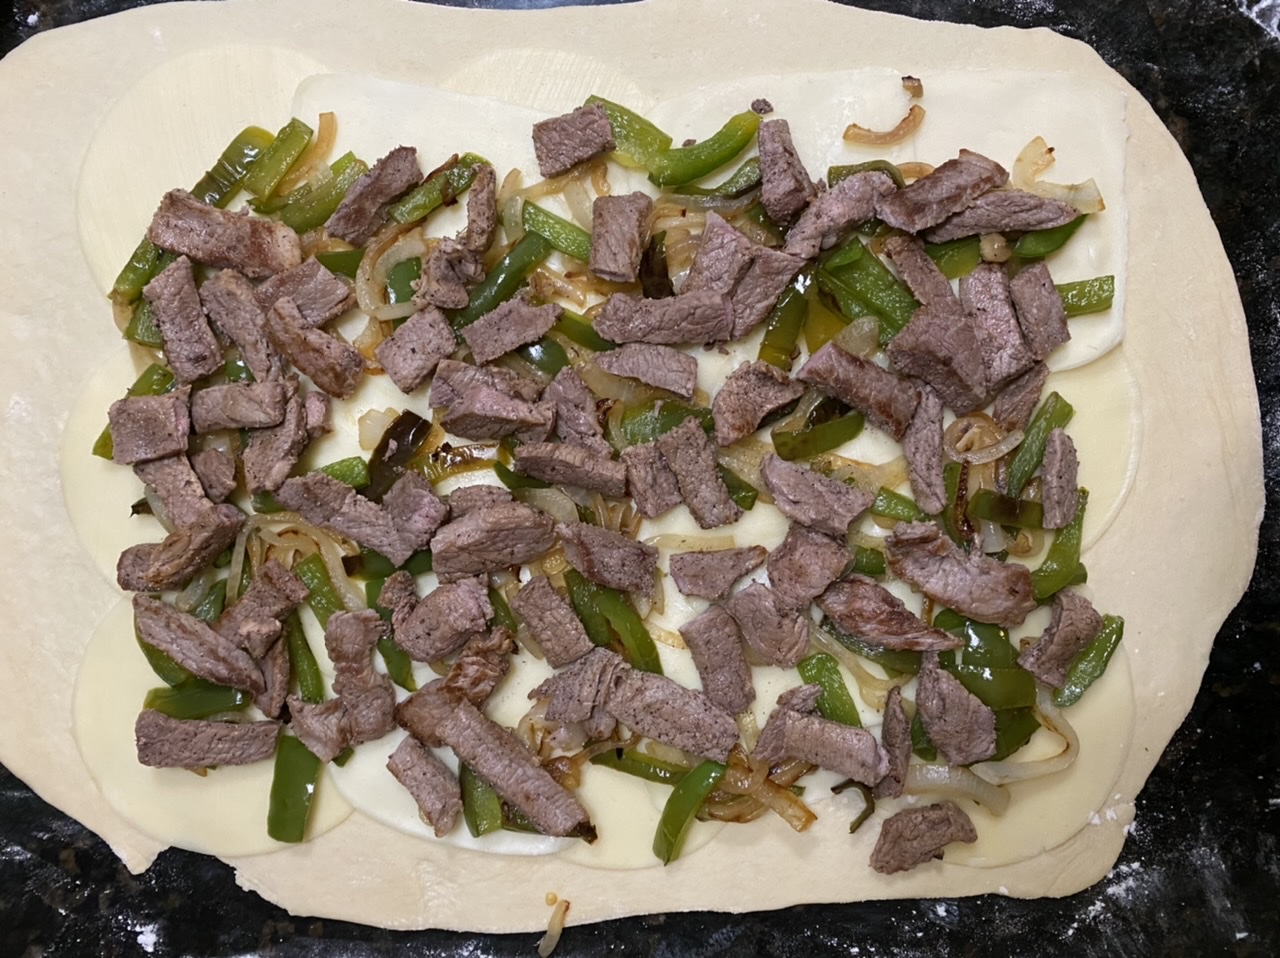 Peppers, onions, and steak on top of pizza dough